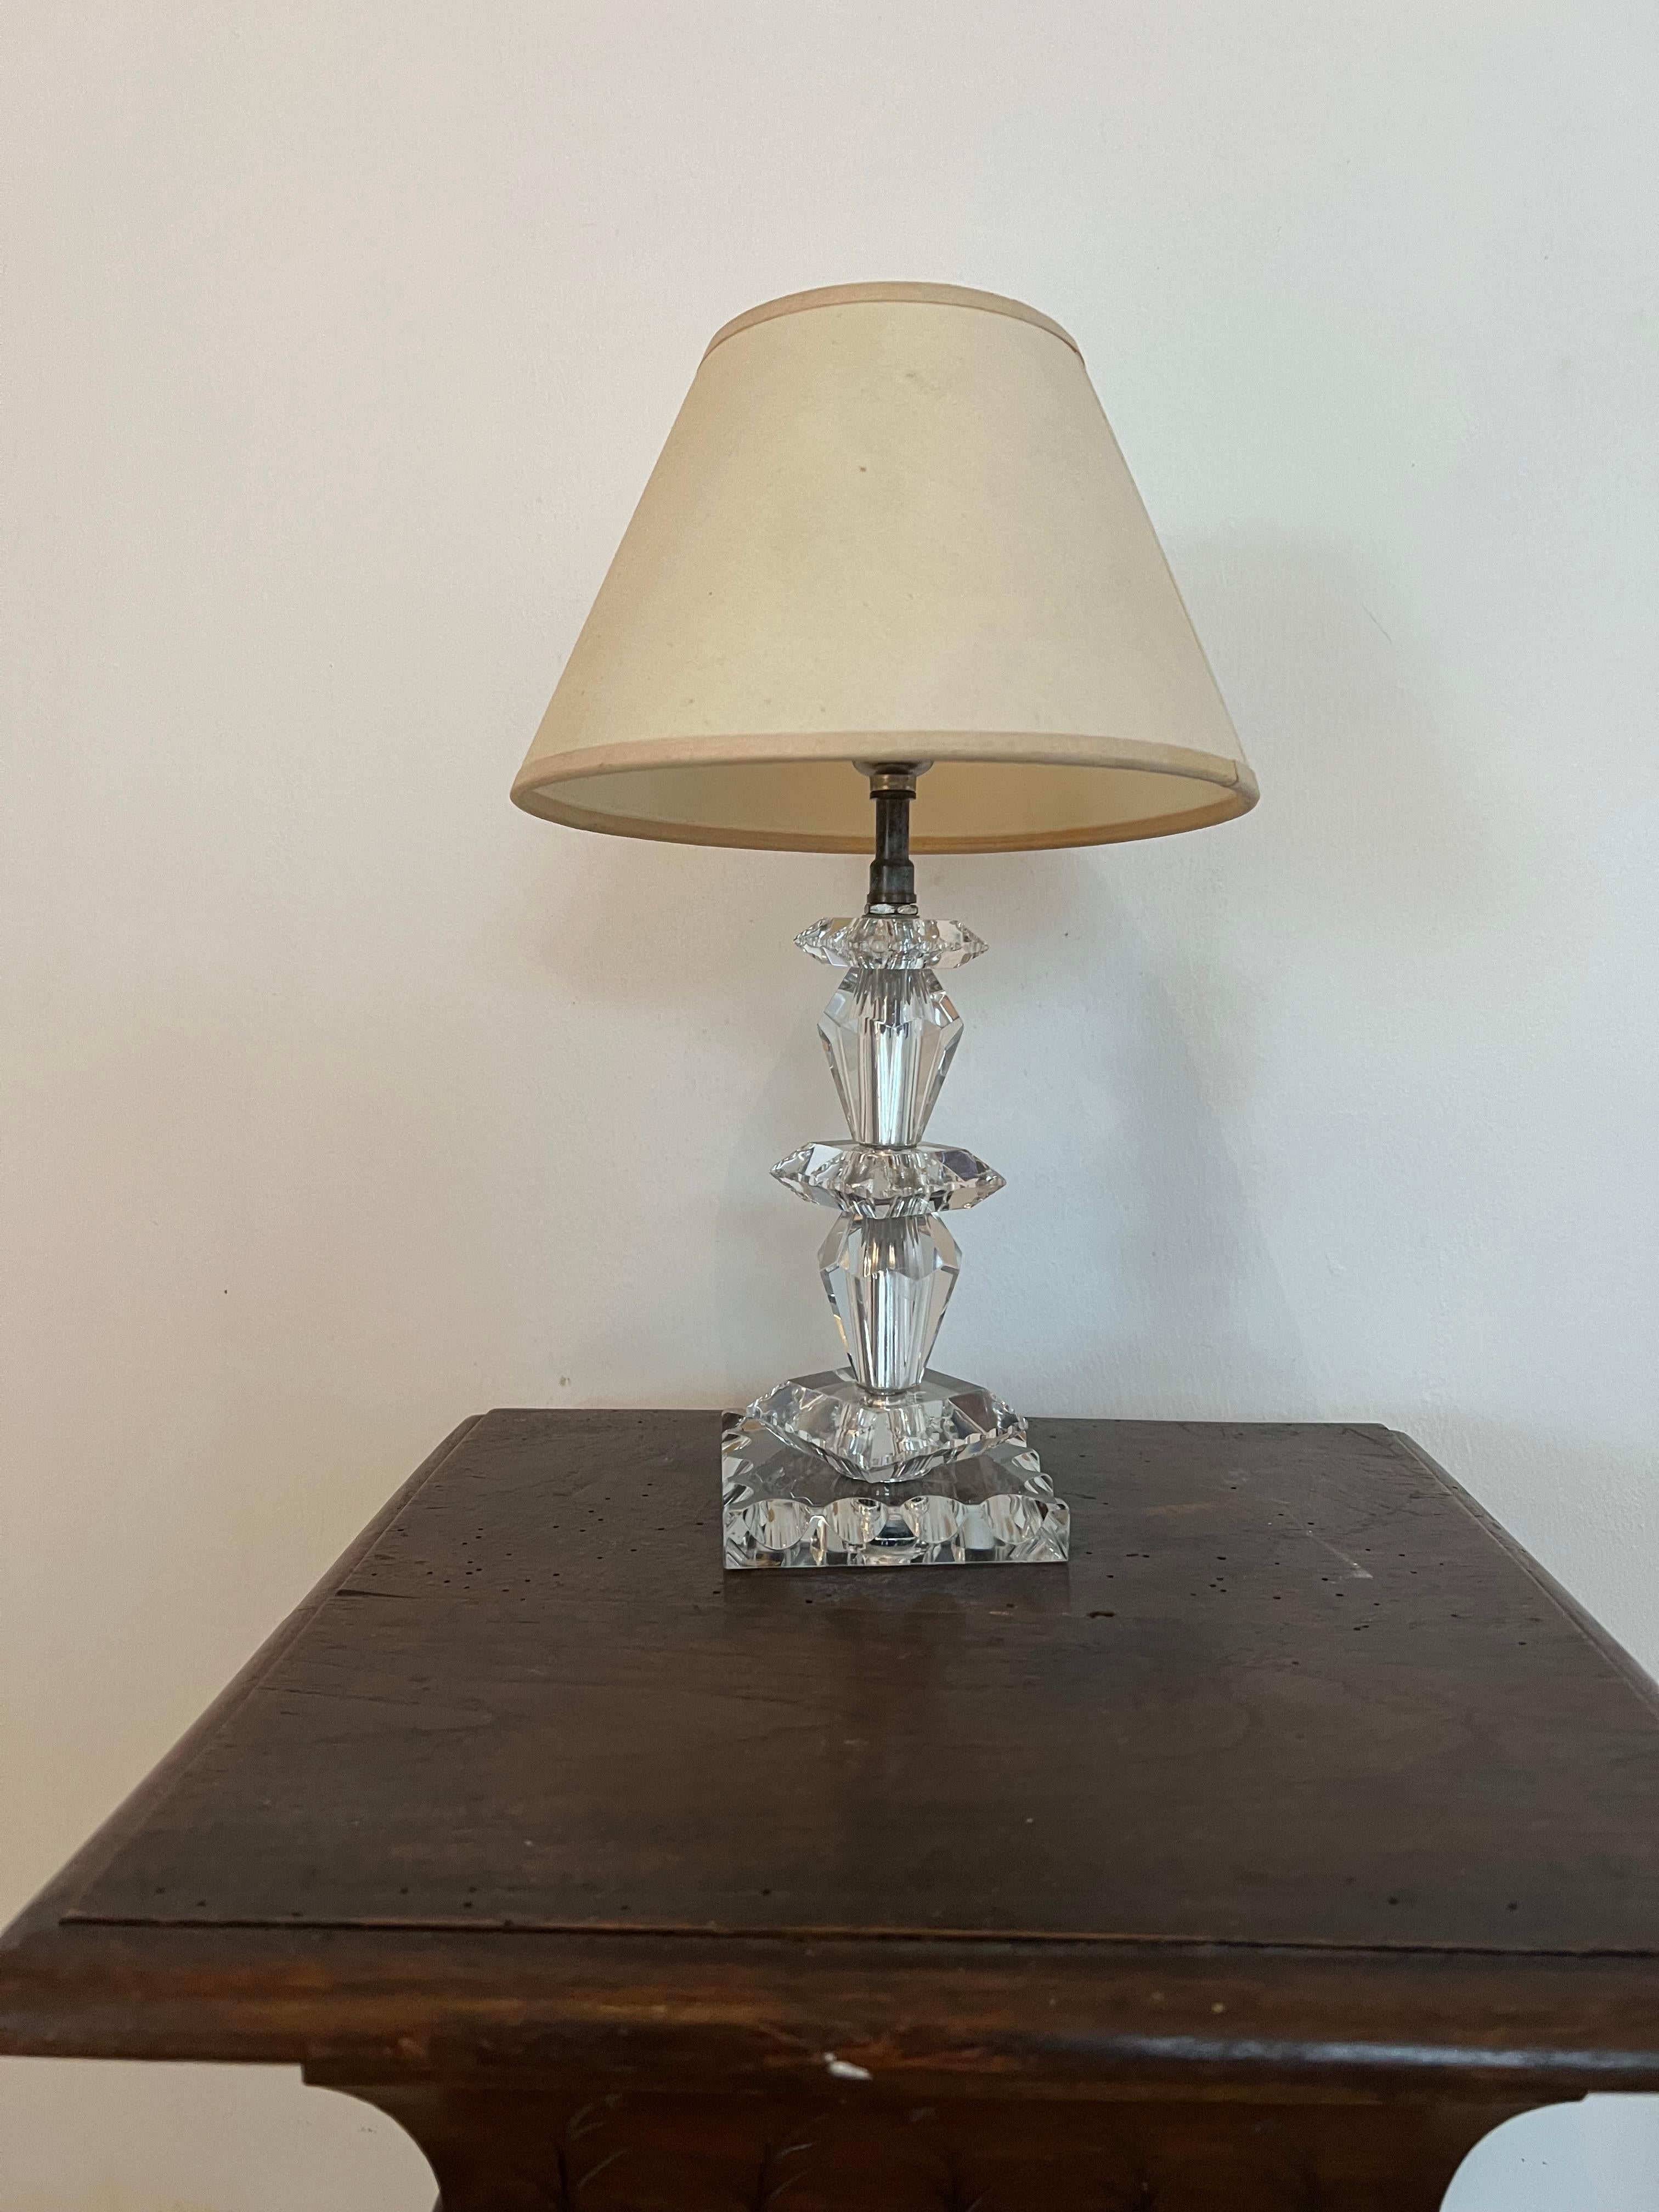 Pair of Art Deco Lamps by Baccarat, France circa 1940, Attr. to Jacques Adnet For Sale 1